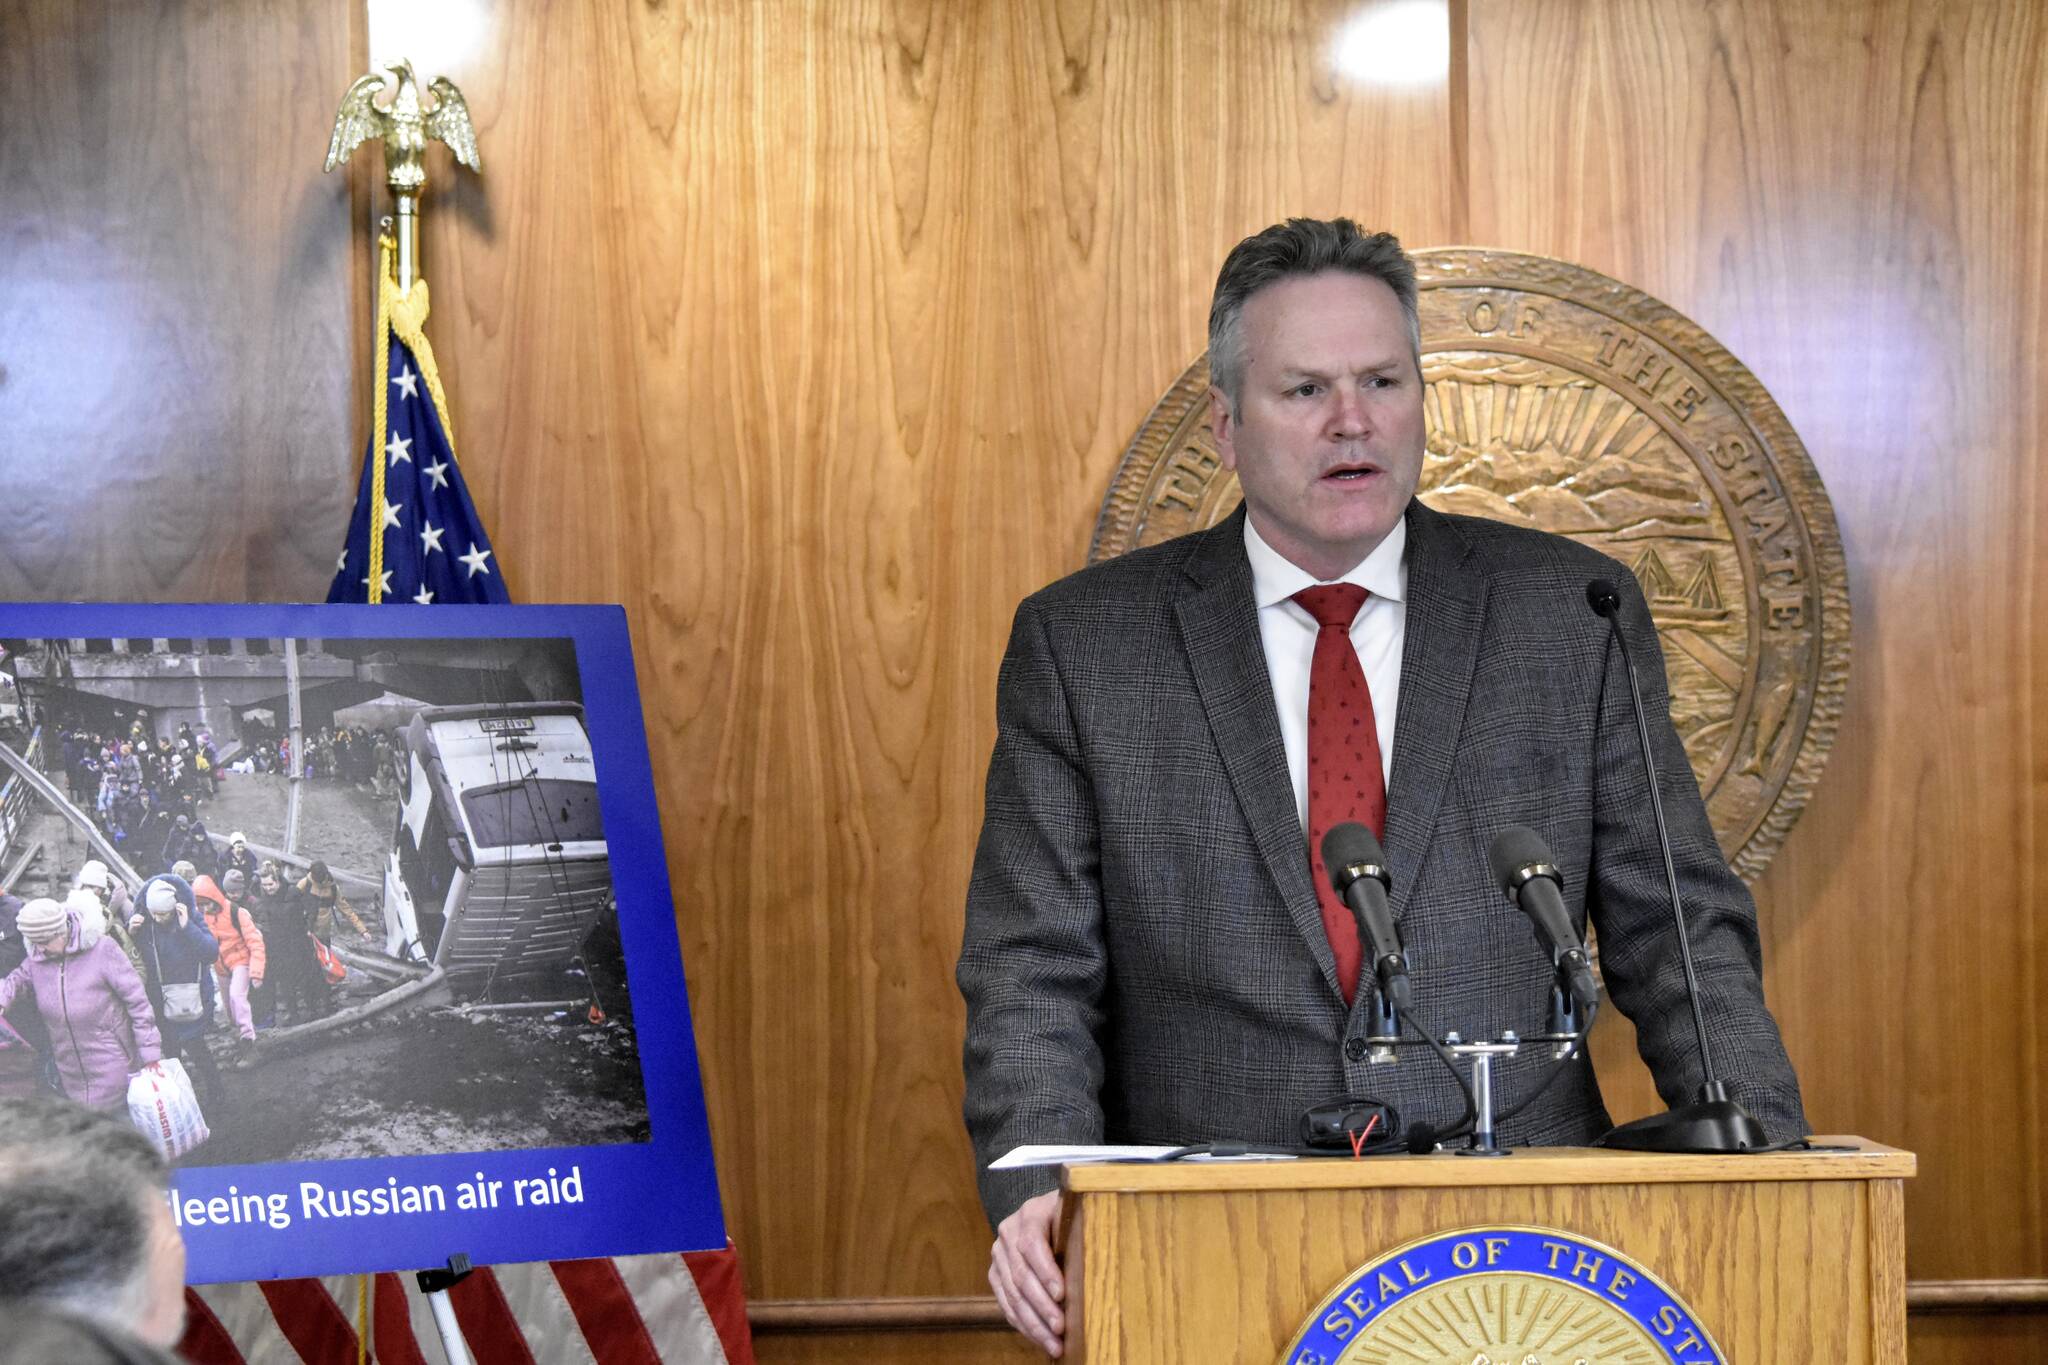 At a news conference at the Alaska State Capitol on Tuesday, March 8, 2022, Gov. Mike Dunleavy outlined his plan to have the state divest its assets from Russia. The disruption in the global market could be beneficial to Alaska, the governor said, if it is able to develop its resources. (Peter Segall / Juneau Empire)